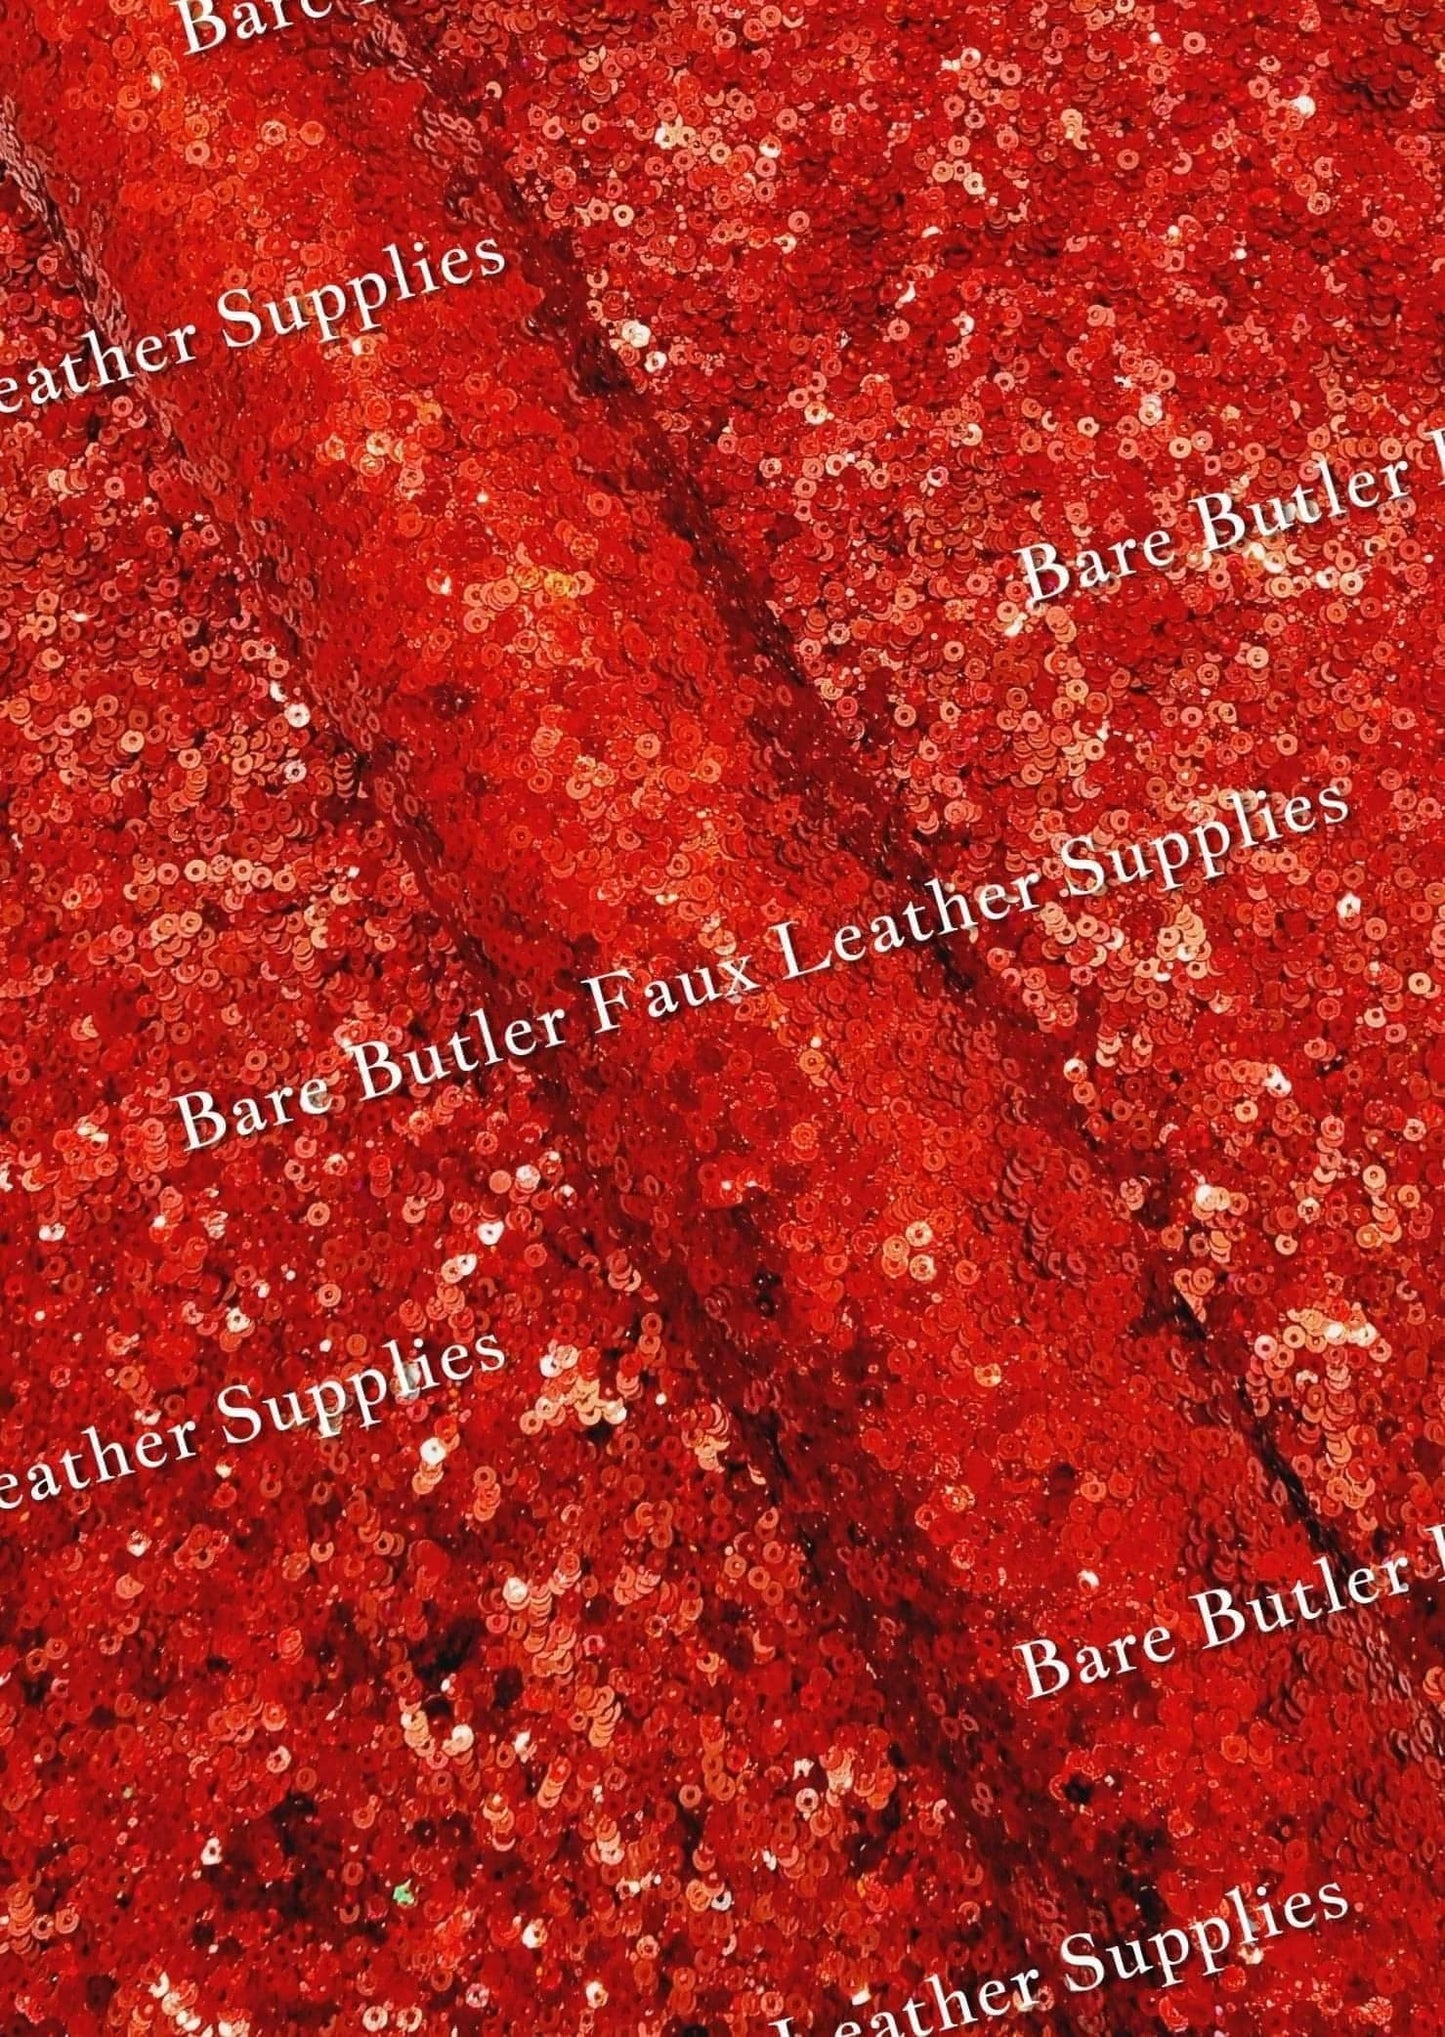 Glitter Sequin Shimmer Red - chunky, Faux, Faux Leather, Glitter, Leather, leatherette, Sequin - Bare Butler Faux Leather Supplies 